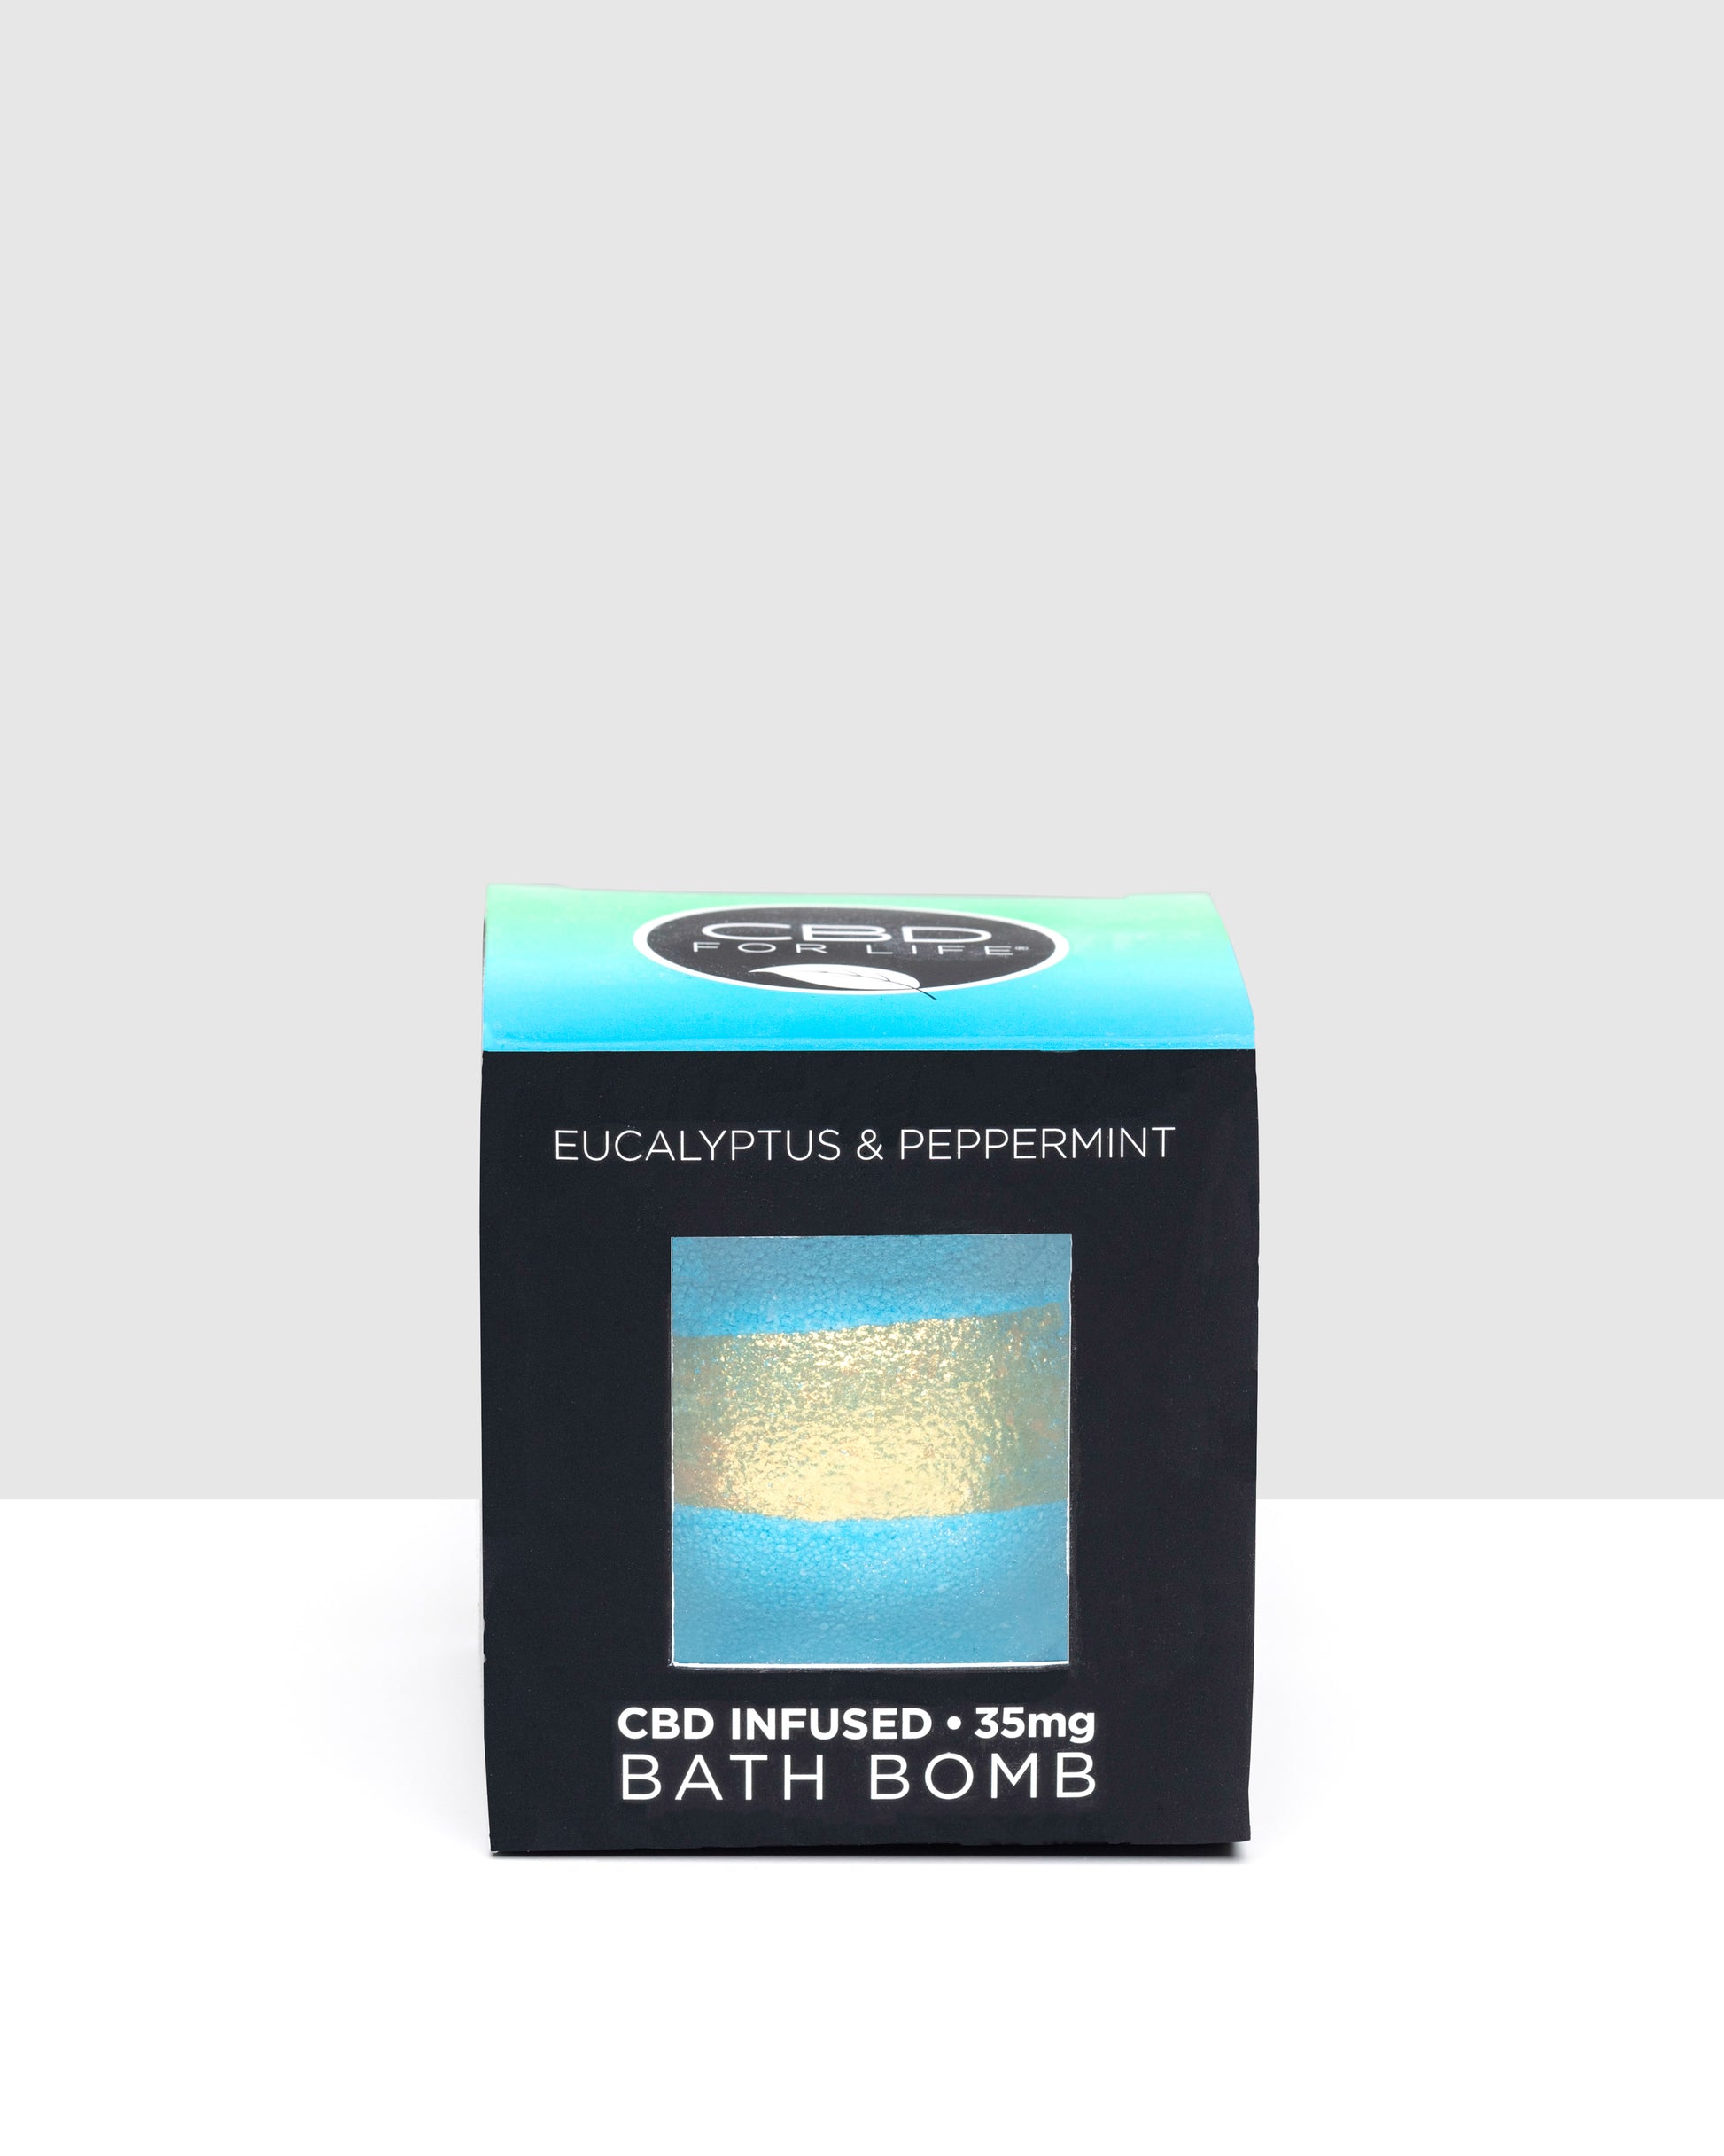 Eucalyptus meets peppermint in this luxurious and opulent bath bomb. Let this amazing CBD bath bomb turn an ordinary bath into a joyful experience after a long day.